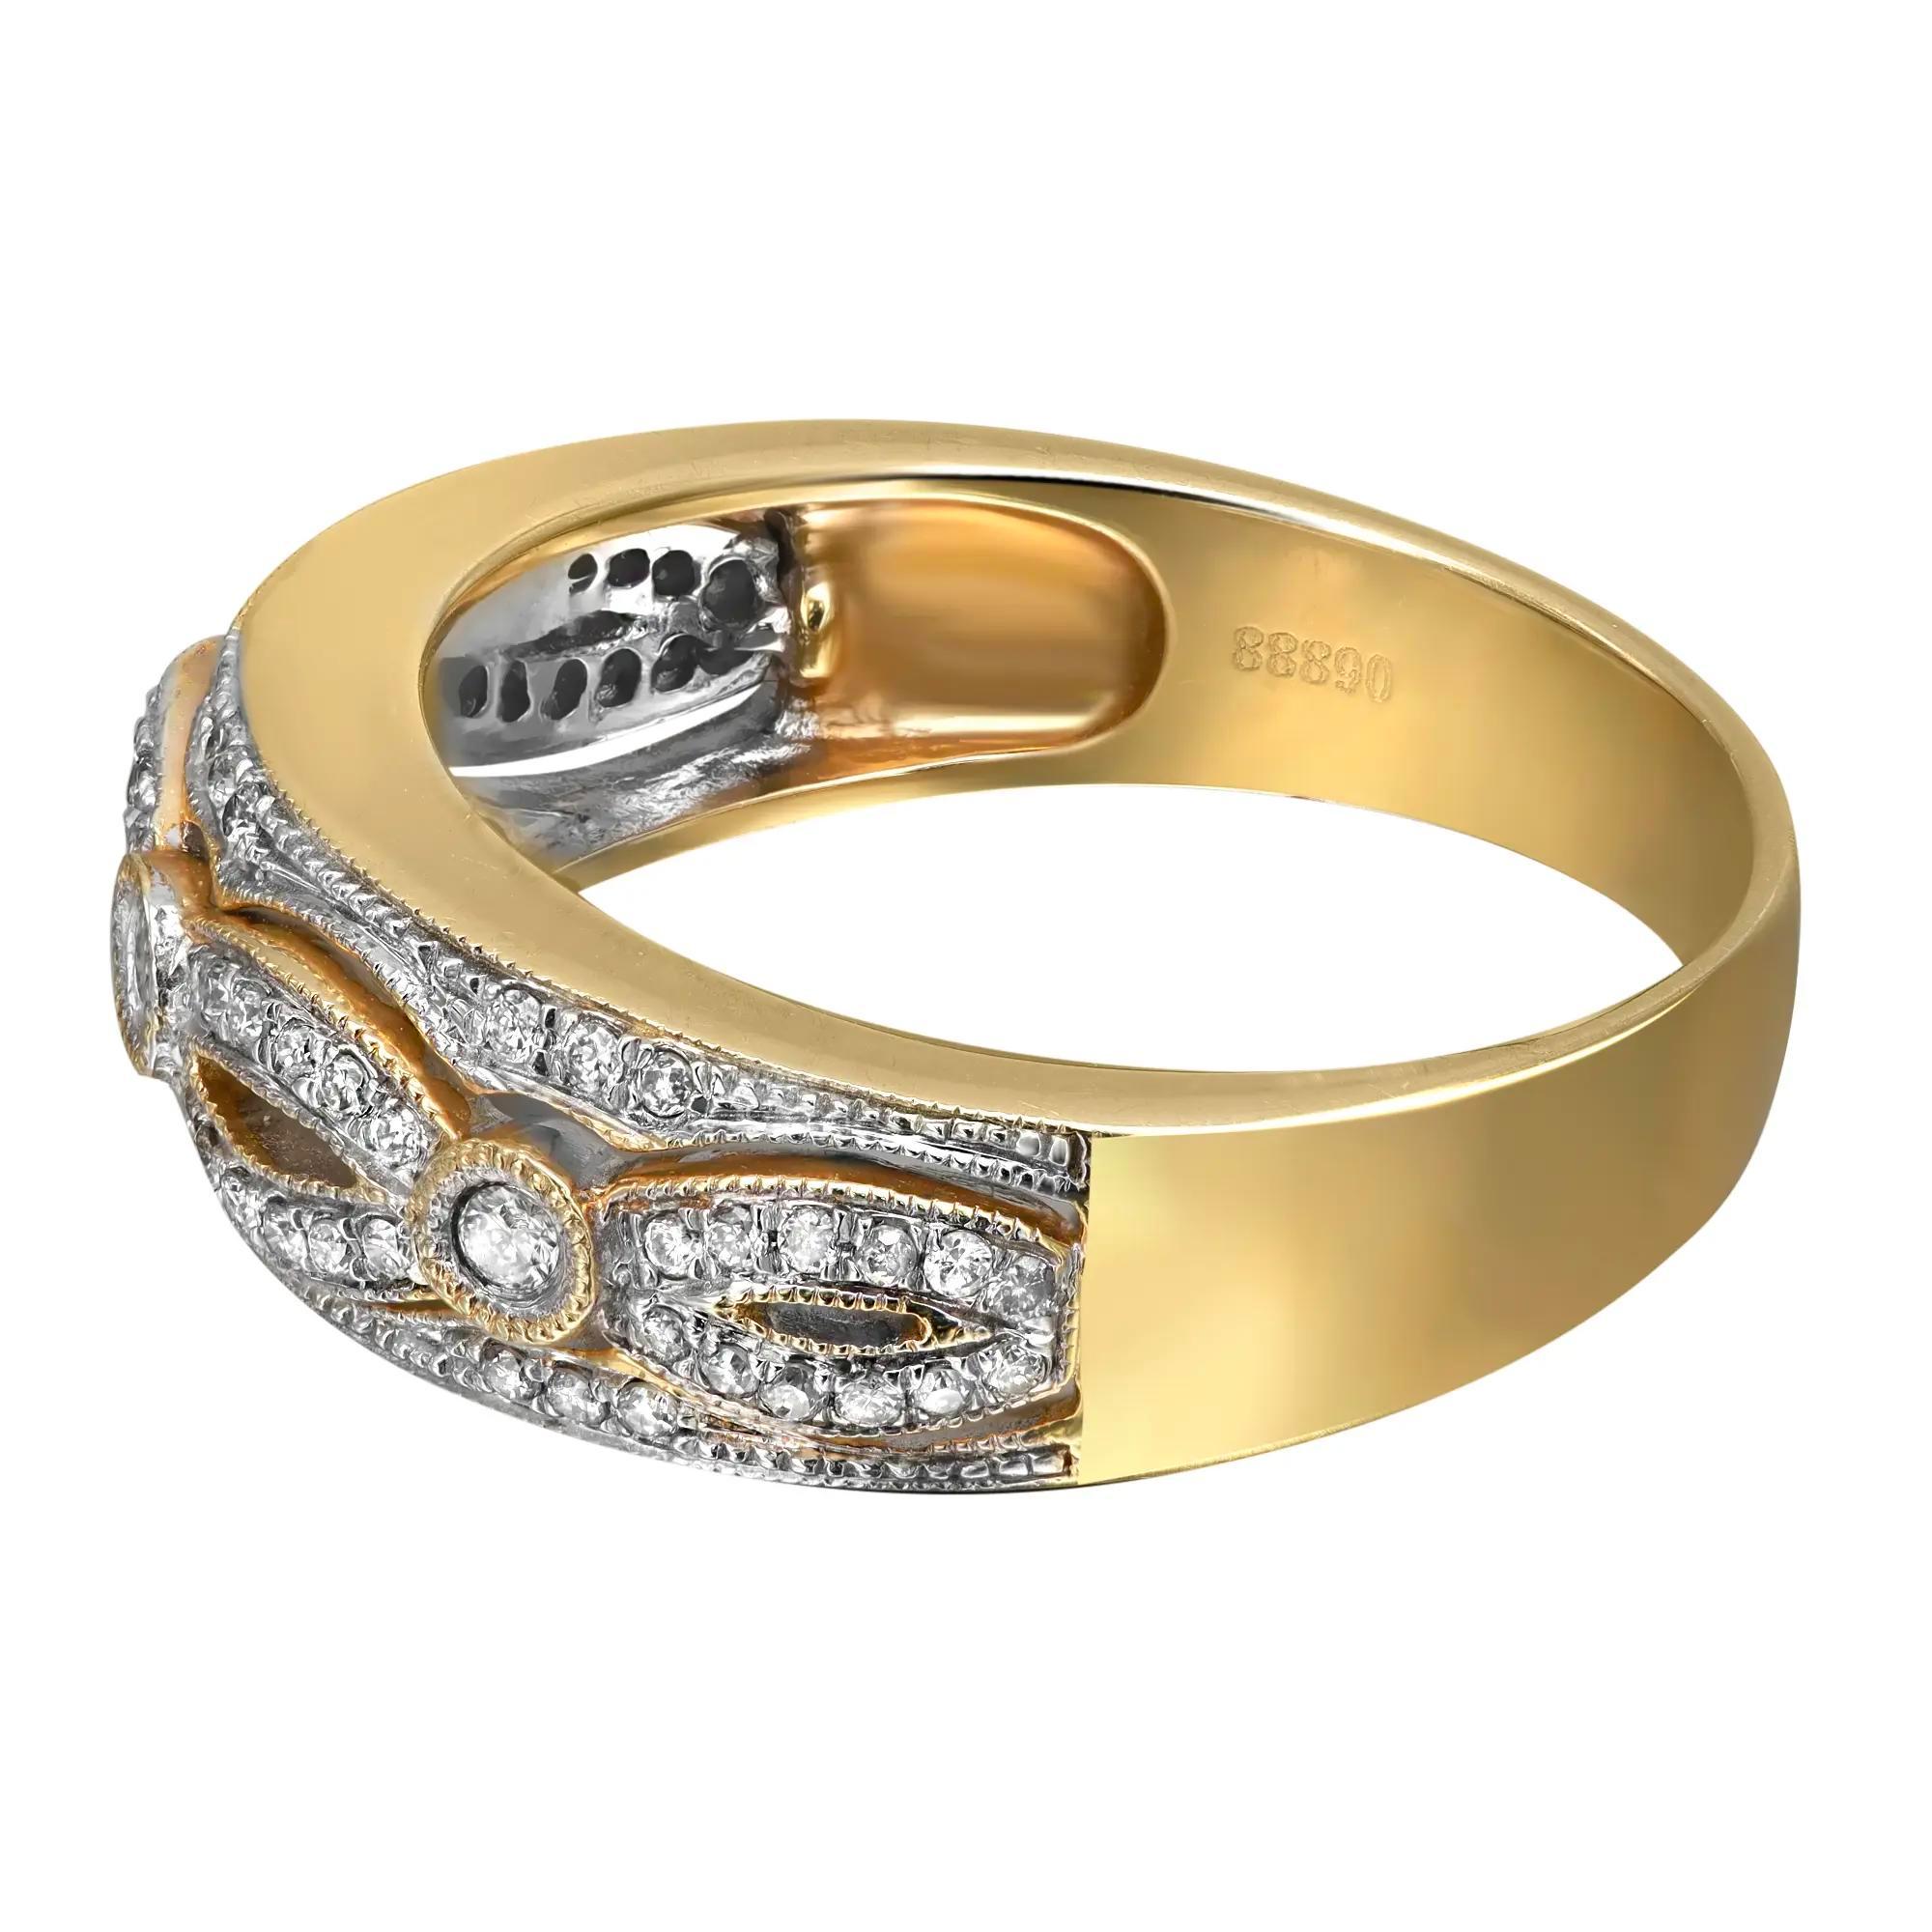 0.26cttw Pave Set Round Cut Diamond Ladies Band Ring 14k Yellow Gold In New Condition For Sale In New York, NY